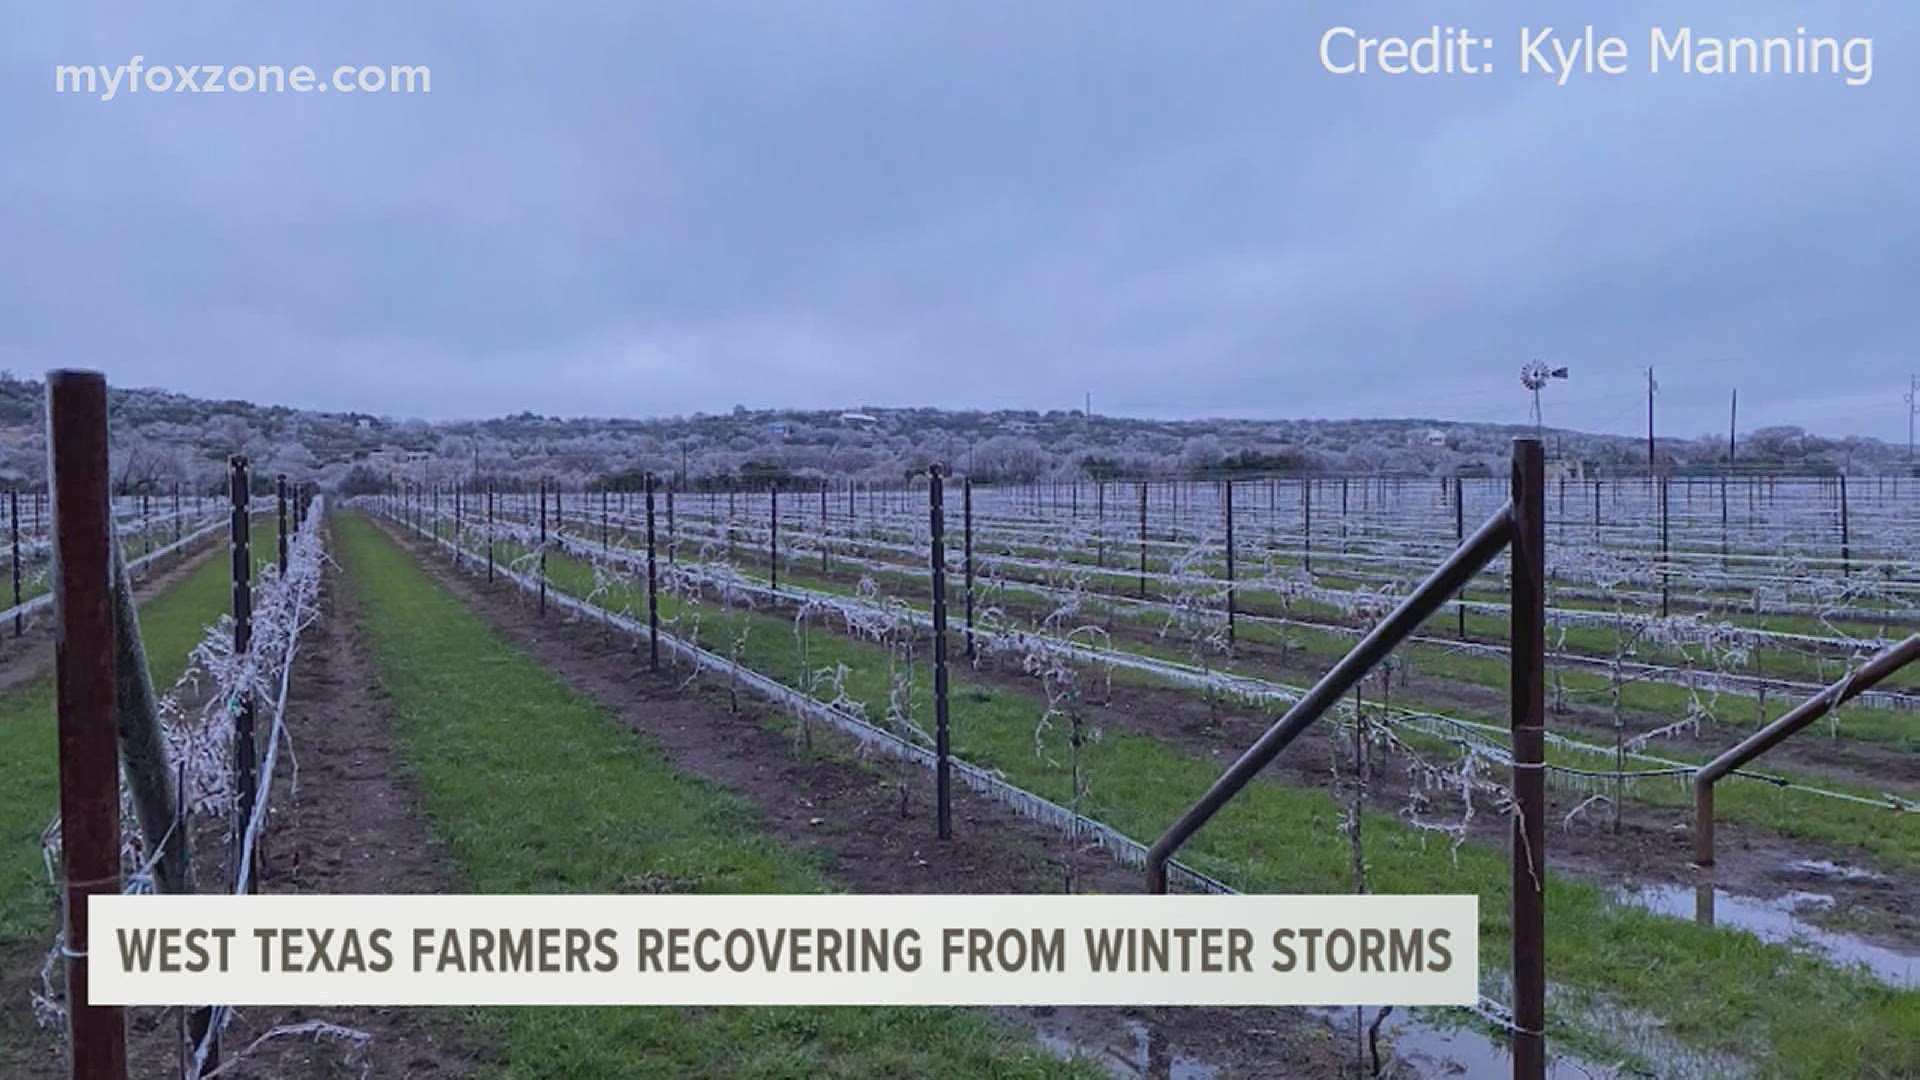 Texas farmers are building from the ground up after losing many crops because of the freezing winter blizzard conditions.